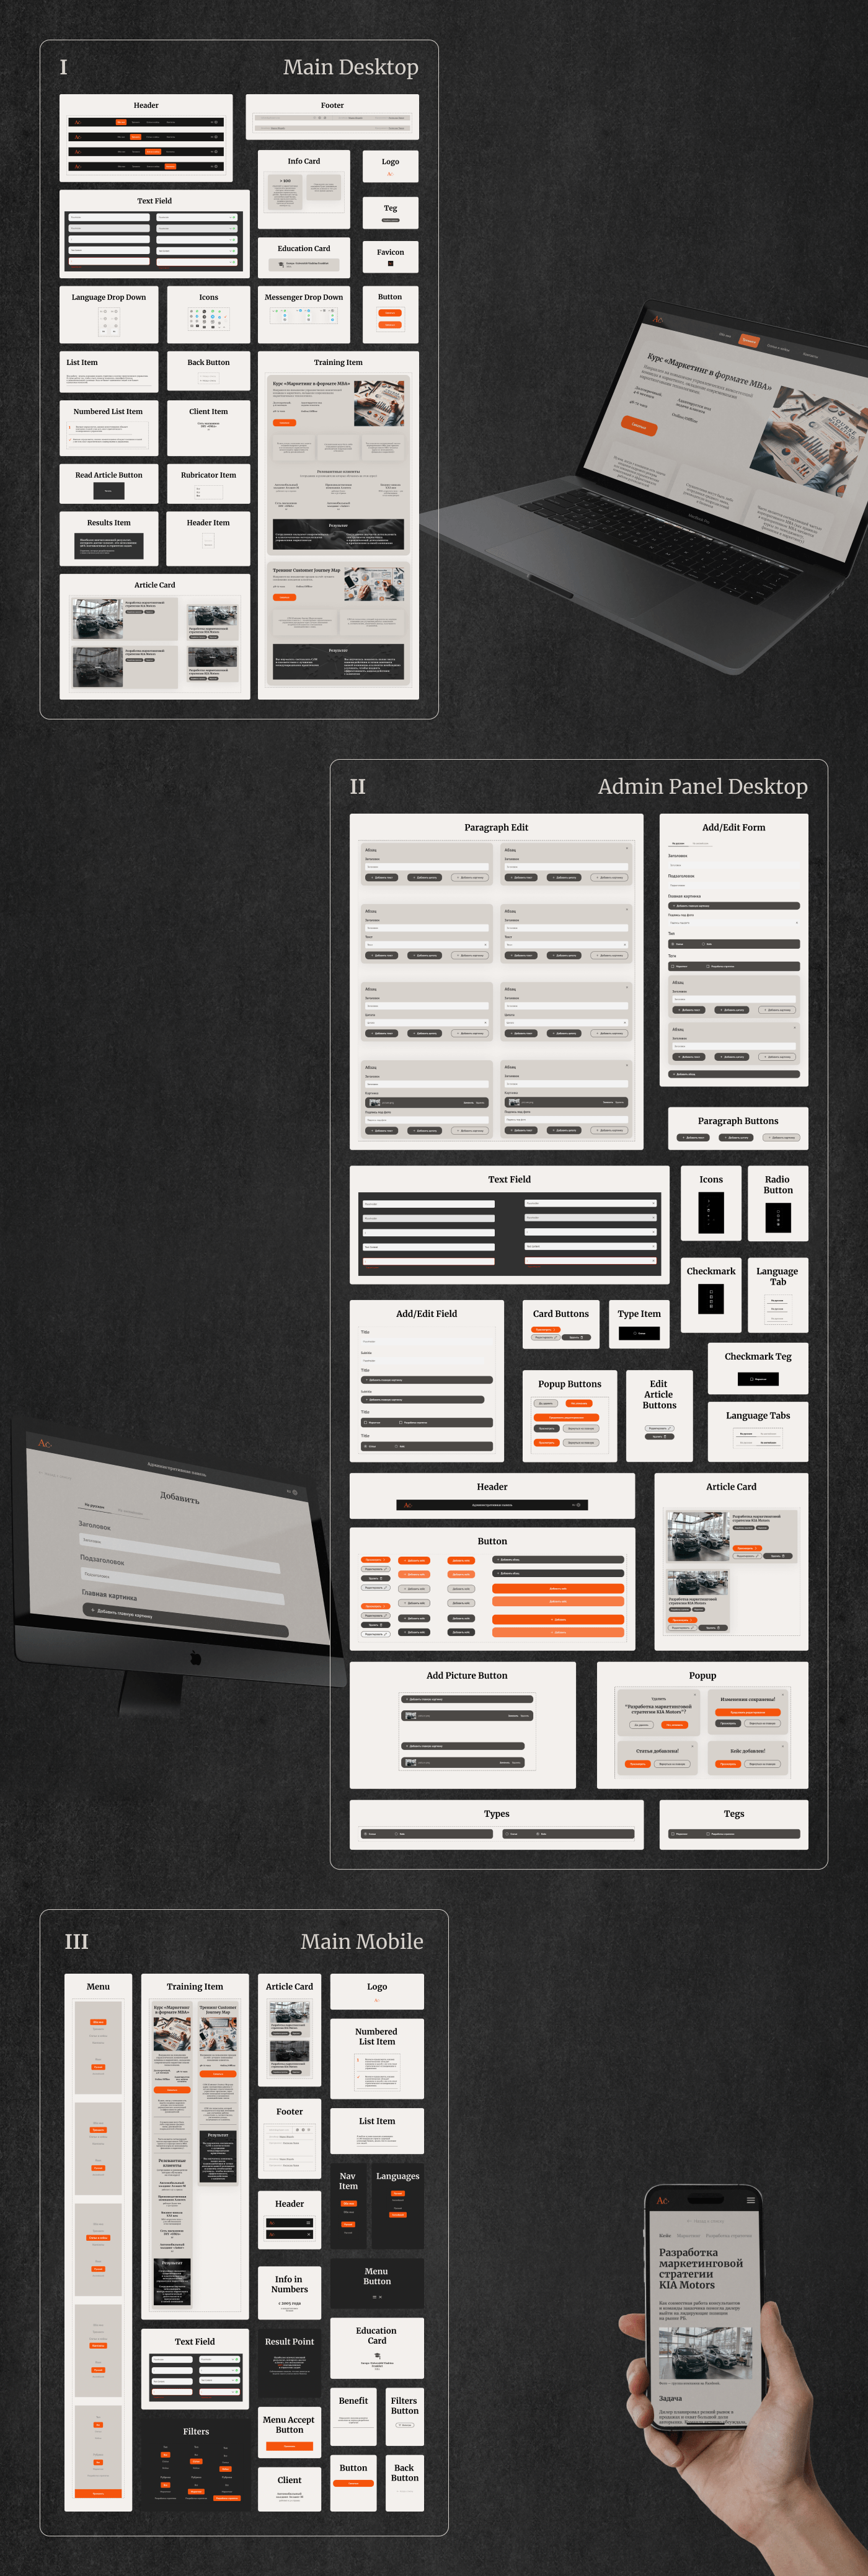 UI/UX user interface user experience Web Design  logo admin panel multipage mobile Adaptive Consulting